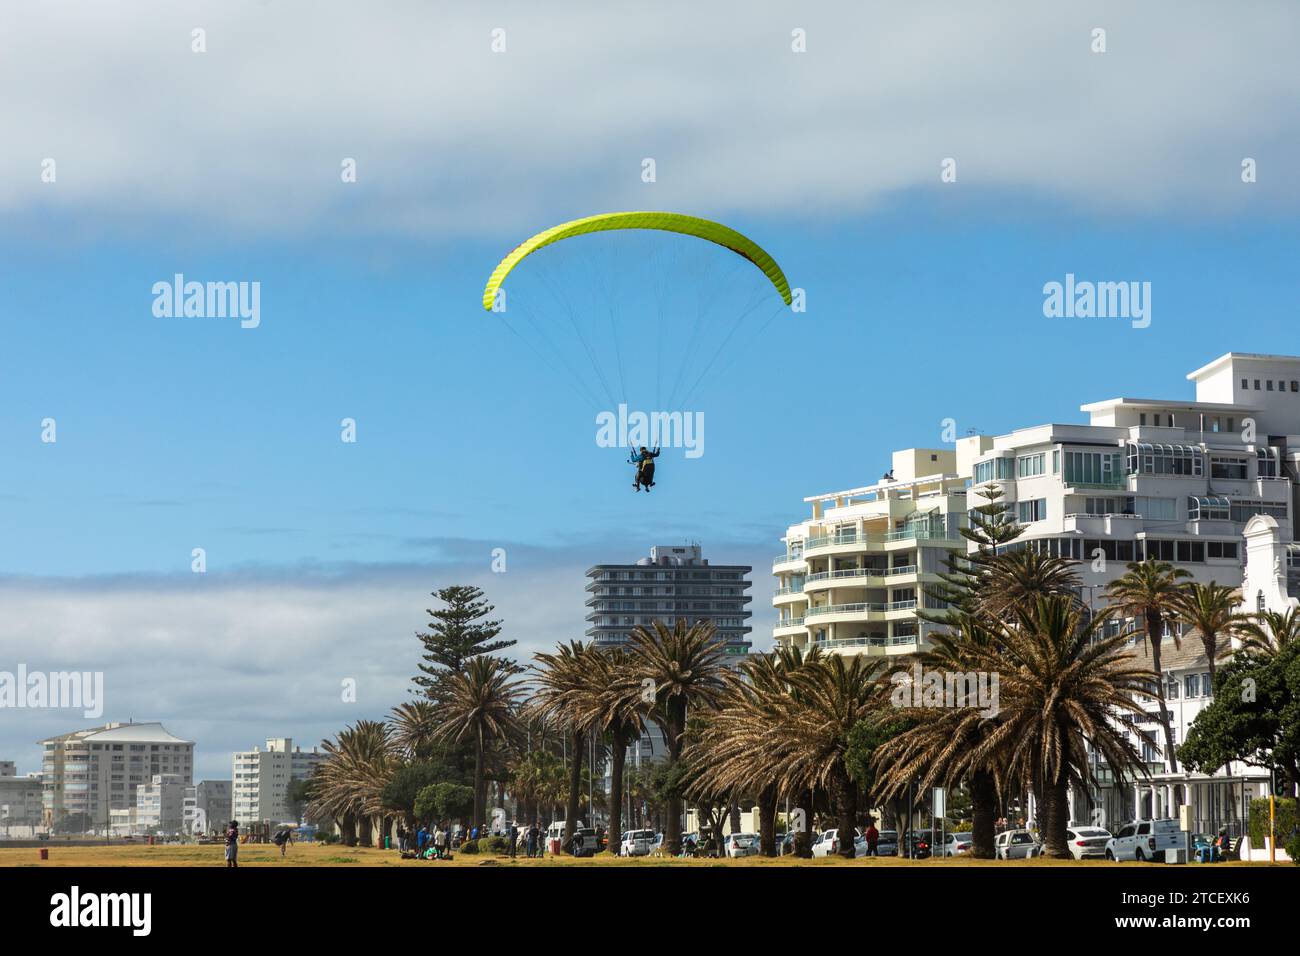 A paraglider prepares to land in a park near the popular promenade in Sea Point, Cape Town, South Africa. Stock Photo